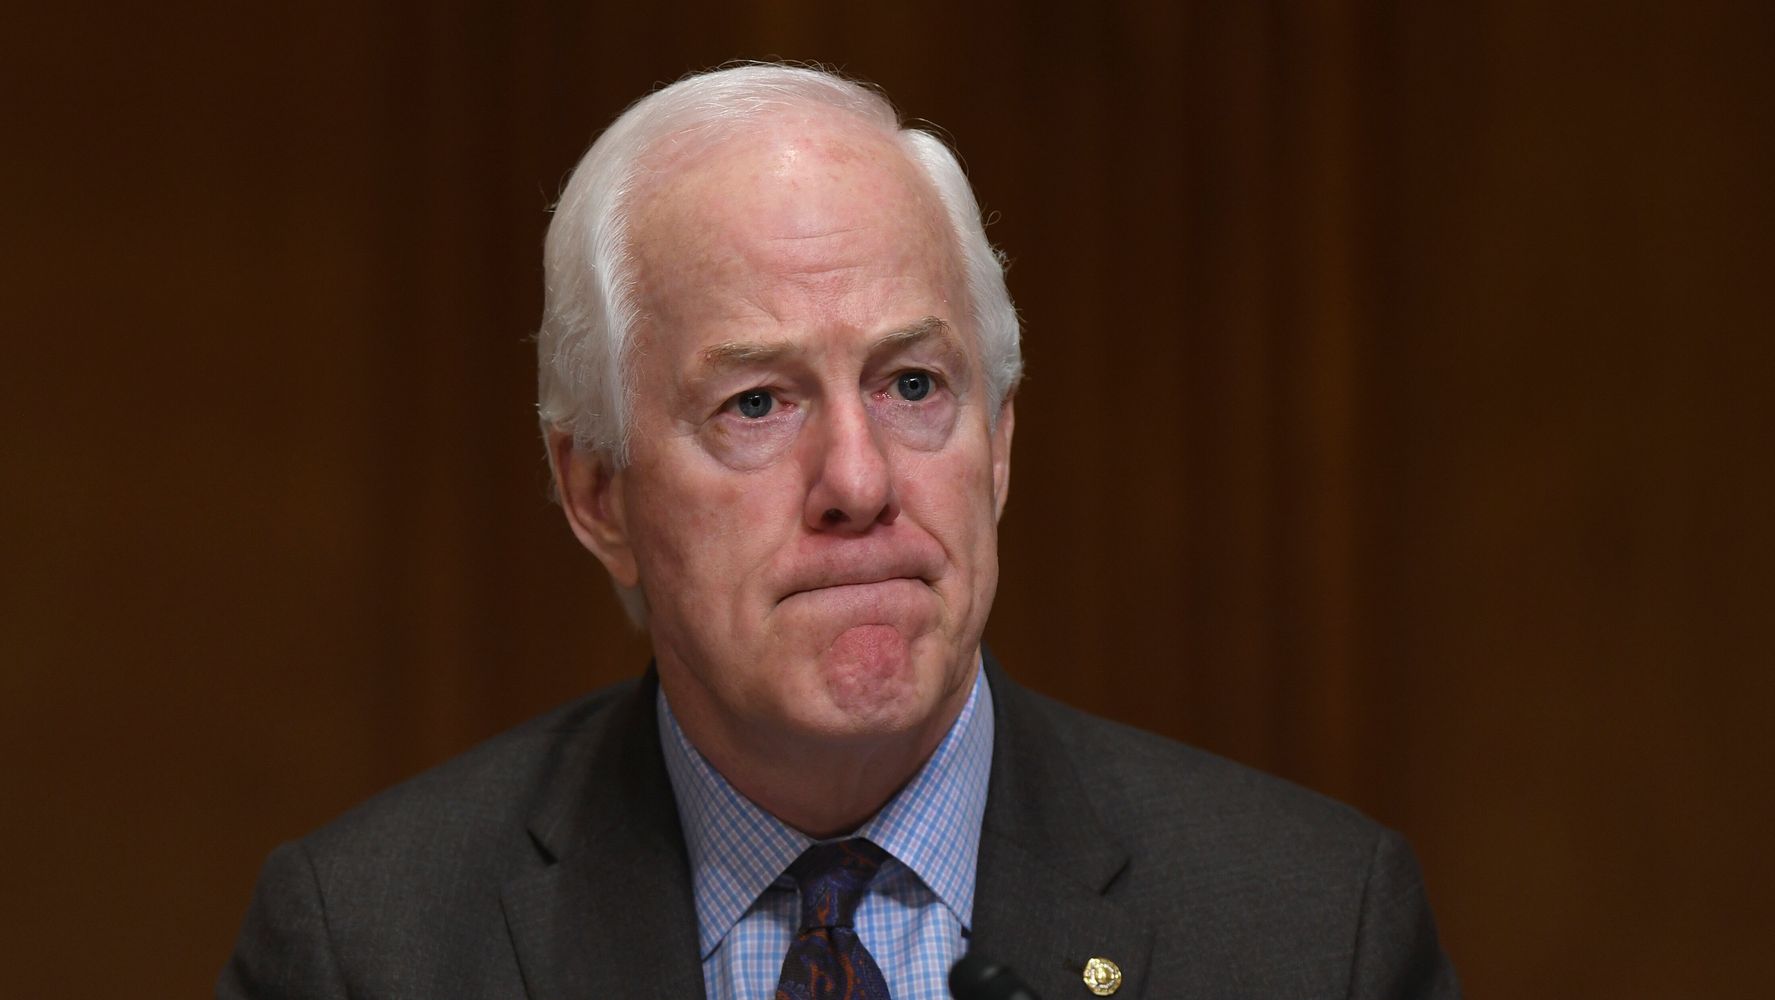 GOP Senator: OK To Pull U.S. Troops If Turkey Trying To 'Ethnically Cleanse' Kurds